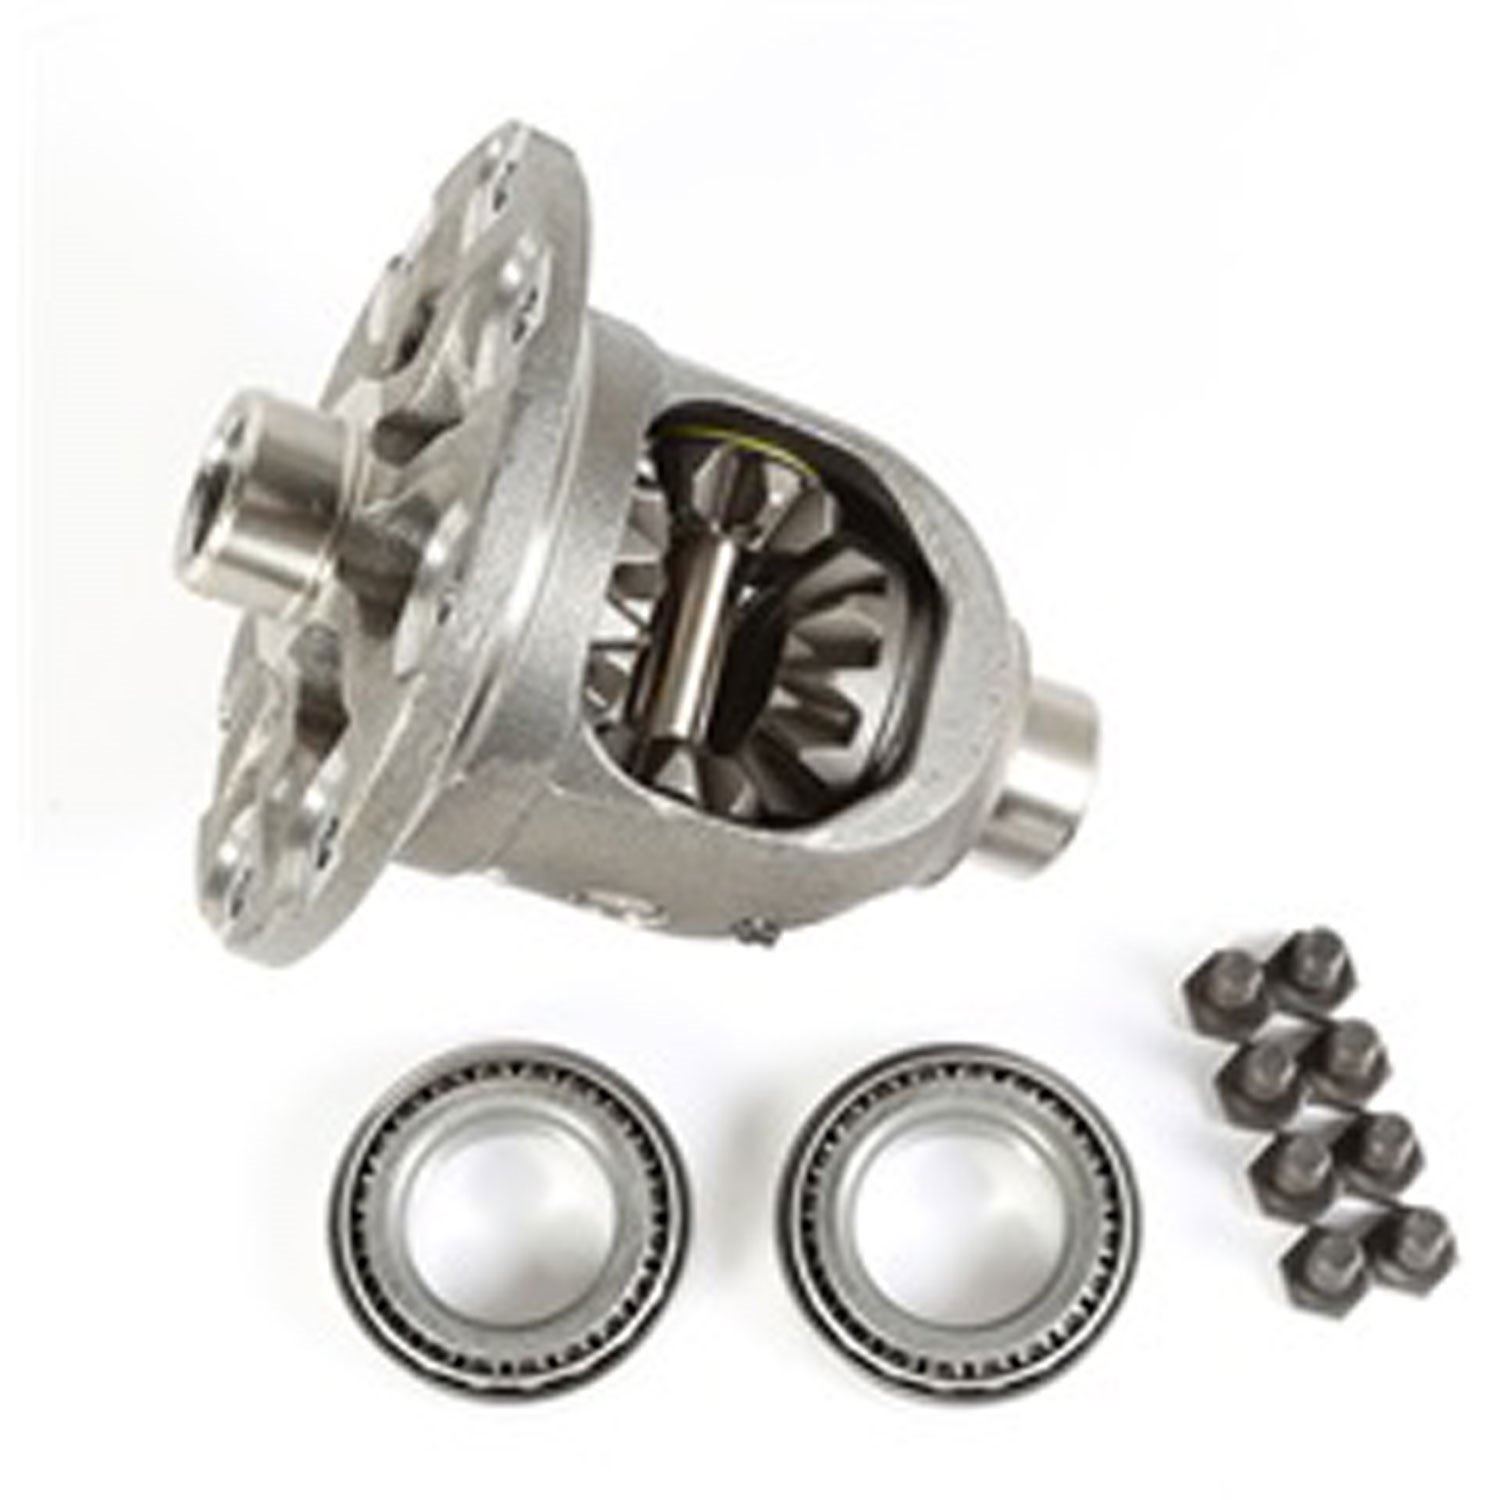 This differential carrier from Omix-ADA fits Jeep Wrangler Cherokees and Grand Cherokees with Dana 3